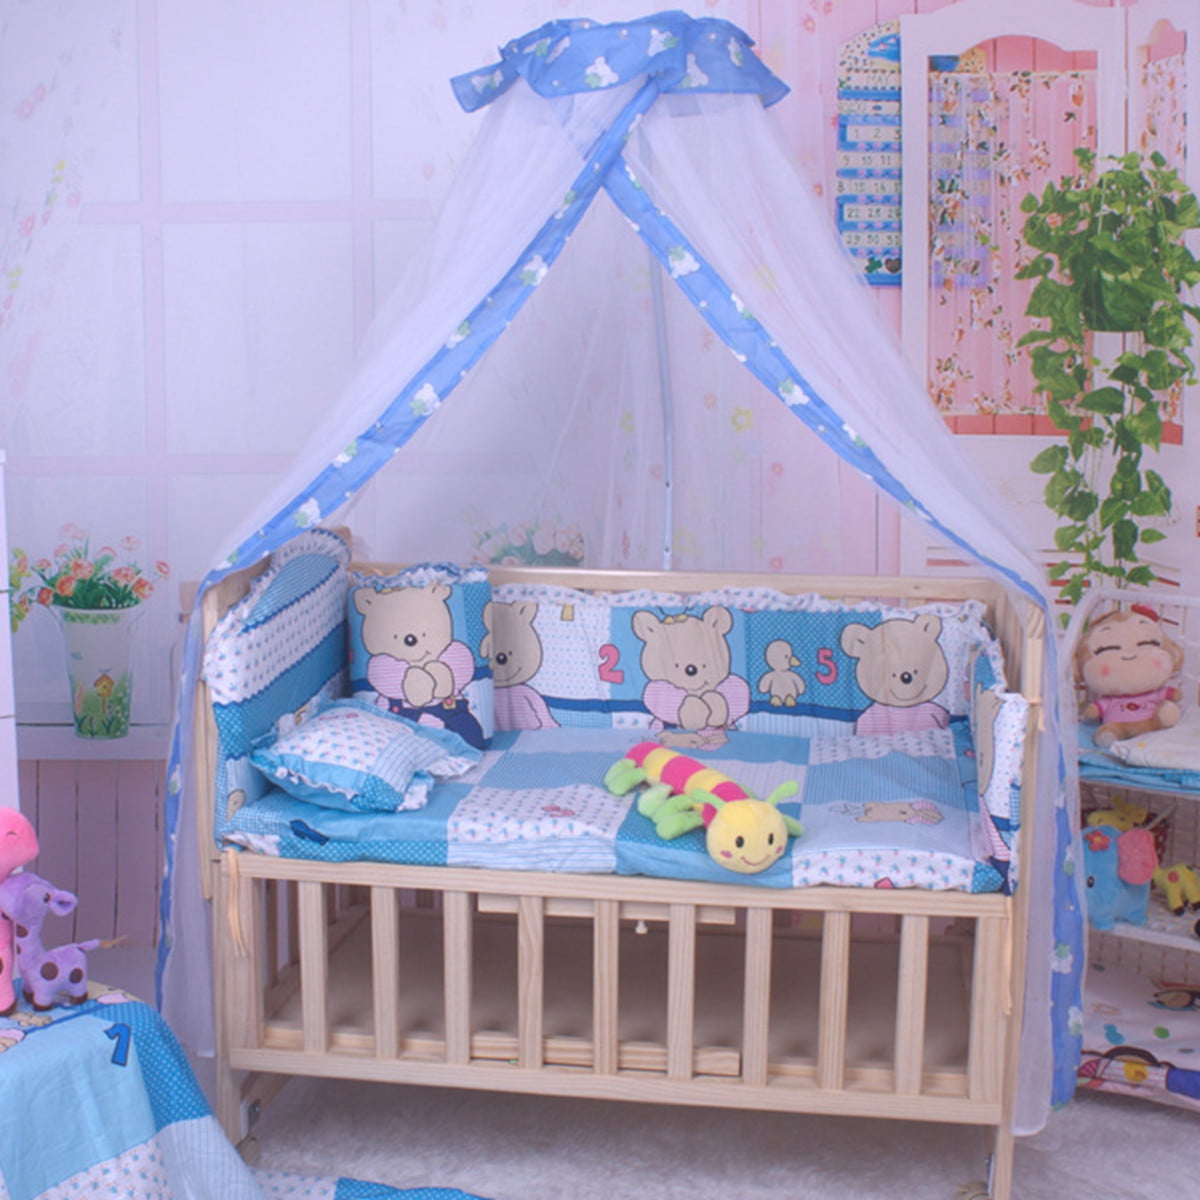 Baby Infant Nursery Mosquito Bedding Crib Canopy Net Hanging Babe Dome Summer 